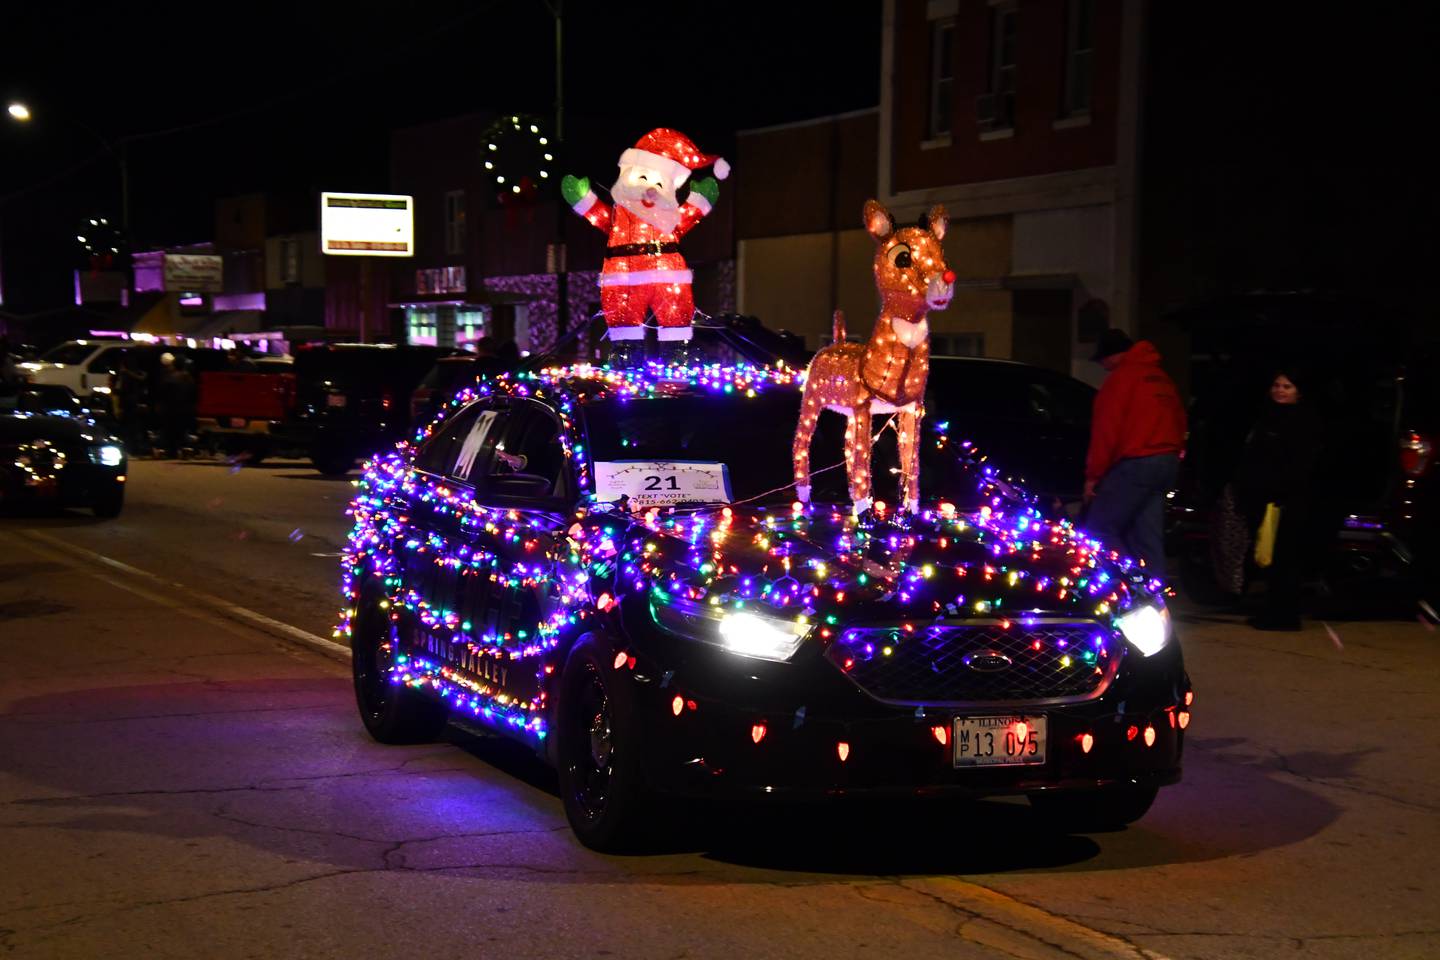 Saturday's Lighted Christmas Parade in Spring Valley